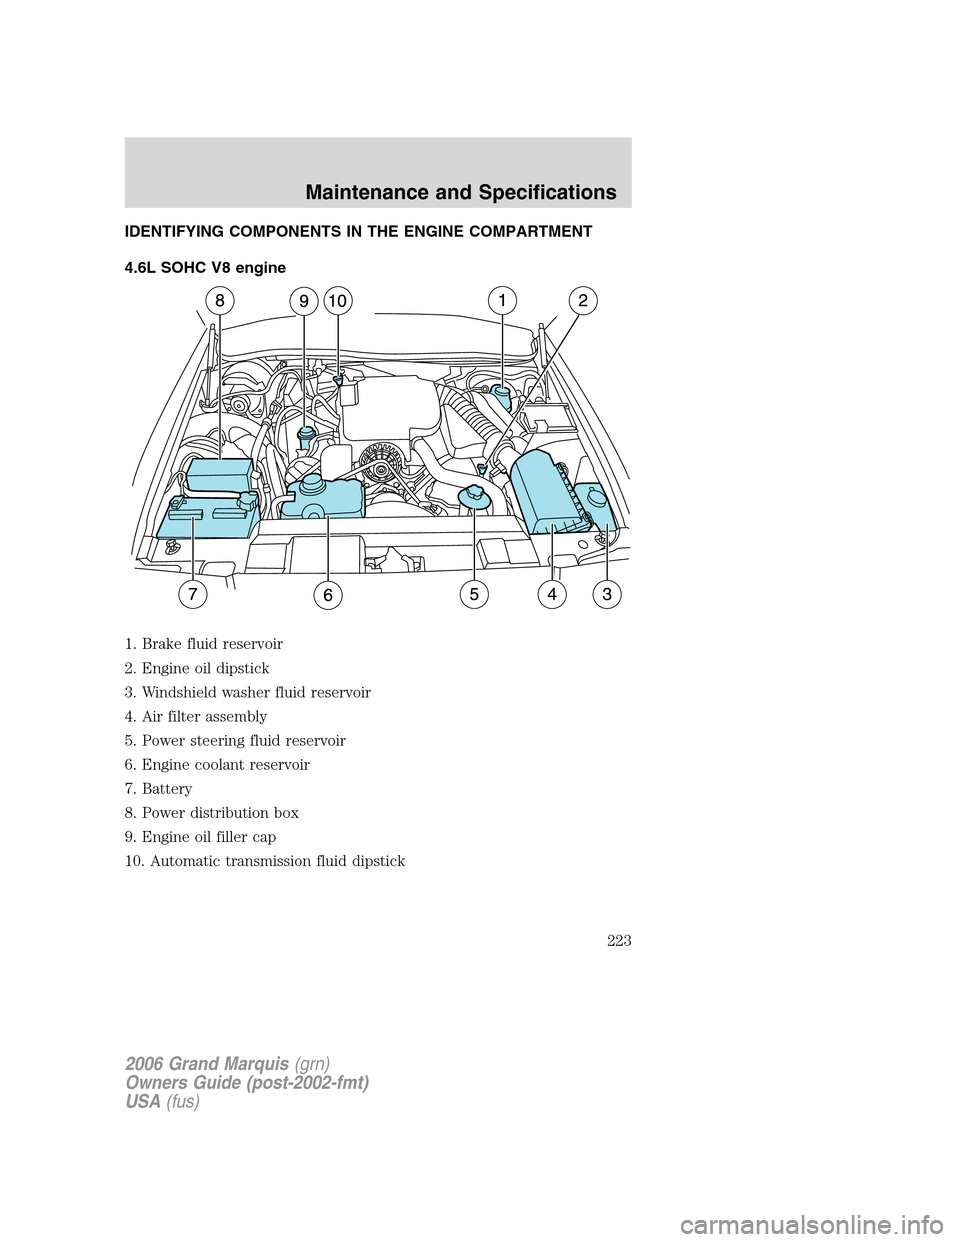 Mercury Grand Marquis 2006  s User Guide IDENTIFYING COMPONENTS IN THE ENGINE COMPARTMENT
4.6L SOHC V8 engine
1. Brake fluid reservoir
2. Engine oil dipstick
3. Windshield washer fluid reservoir
4. Air filter assembly
5. Power steering fluid